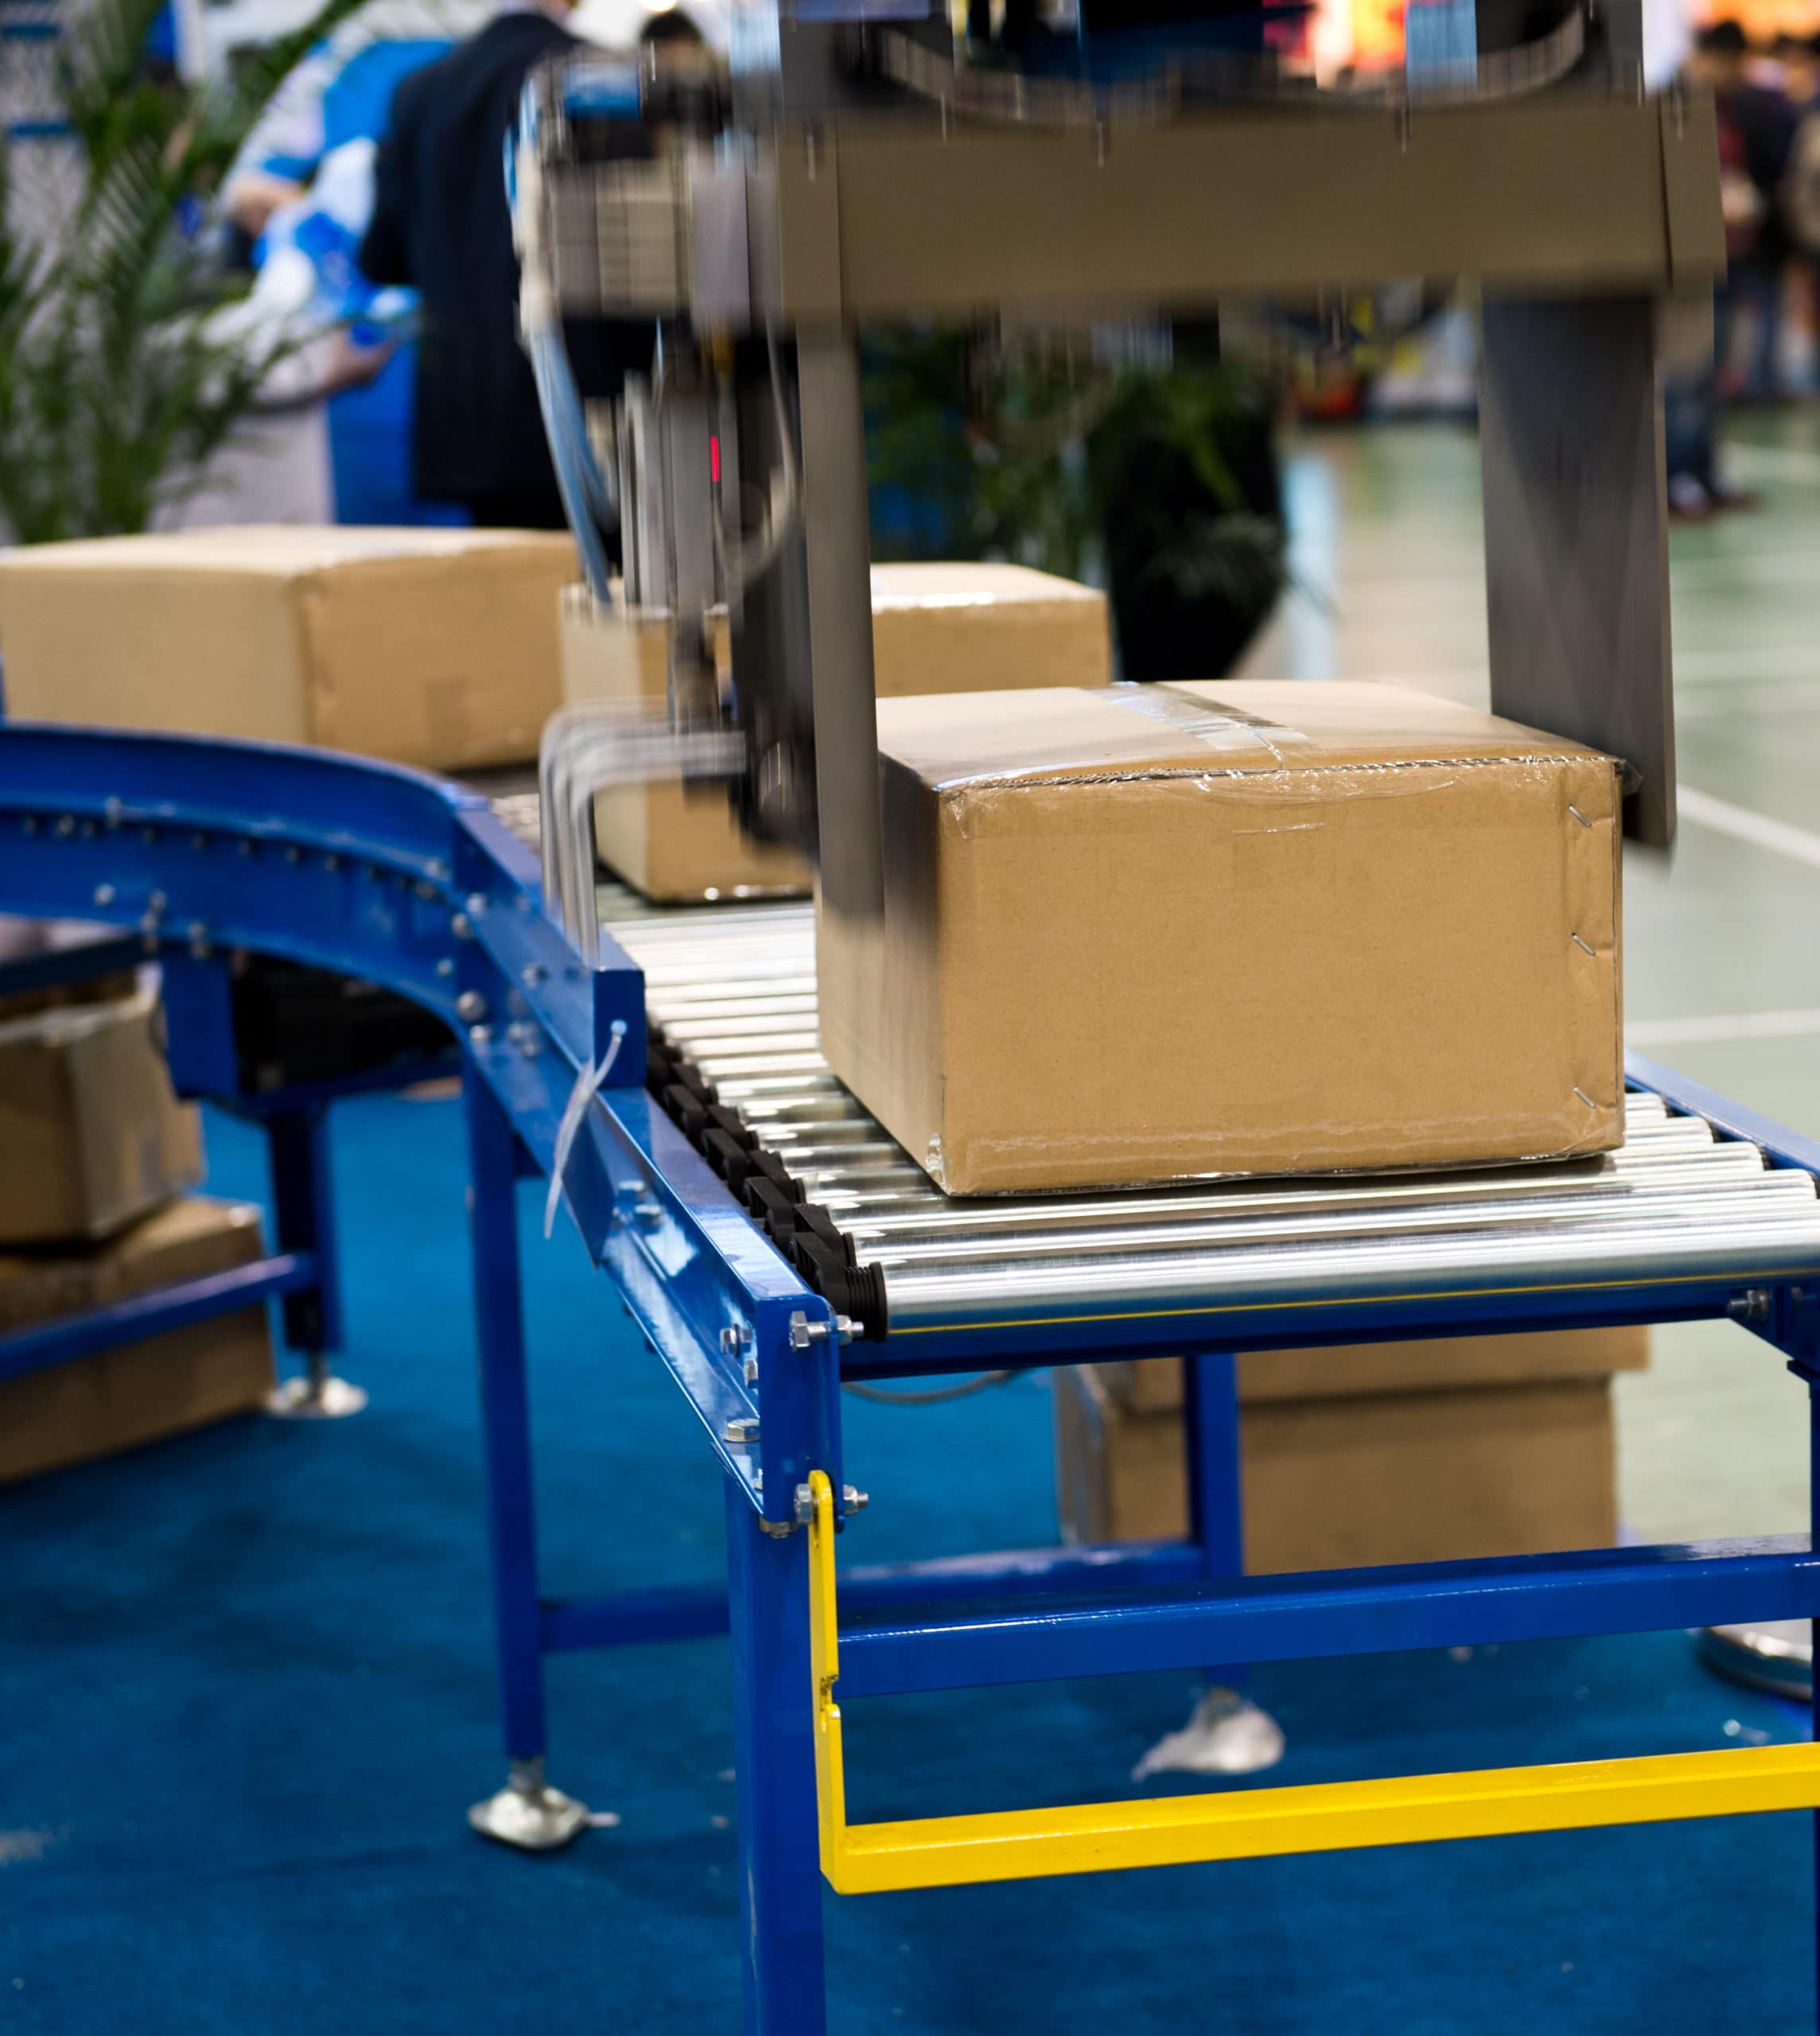 Packing your items - Boxes on conveyor belt